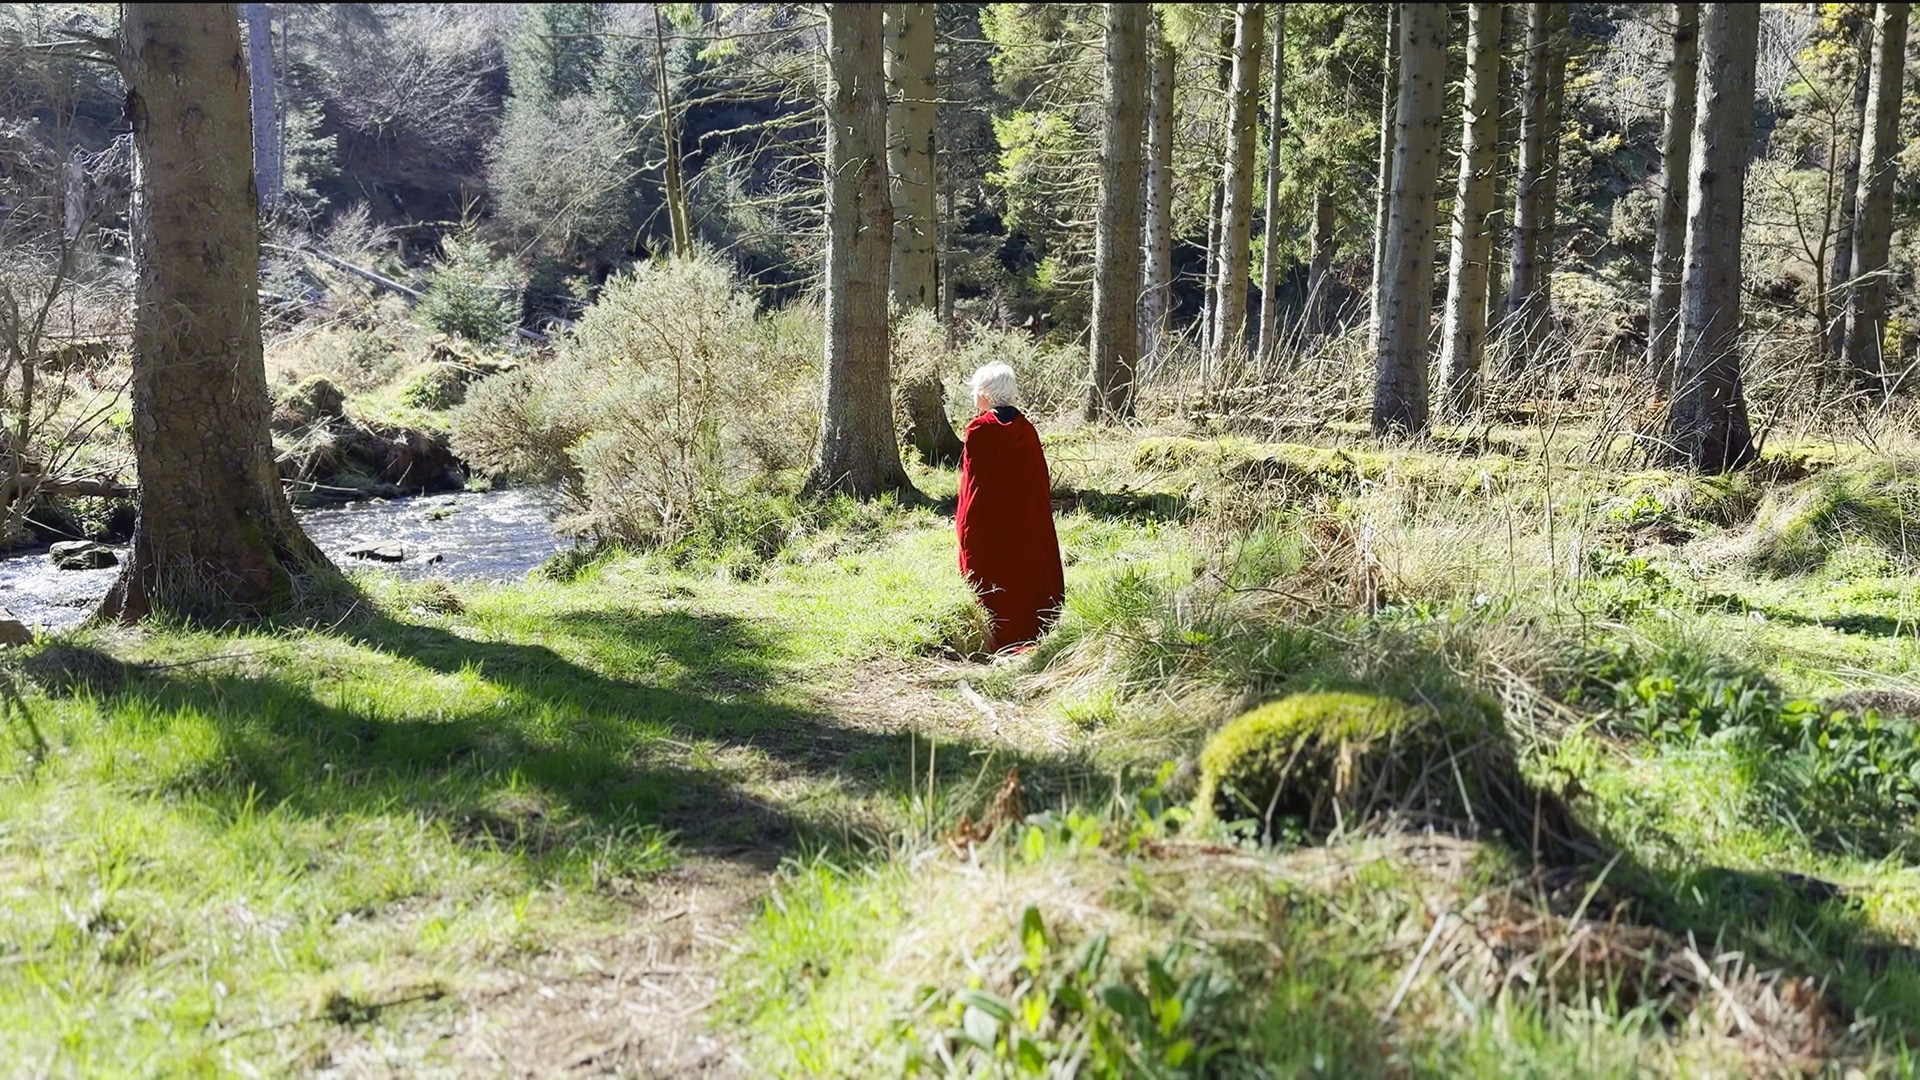 A film still of a person in a red cloak, standing in a sunlit woodland. The figure is looking contemplatively towards the sky.